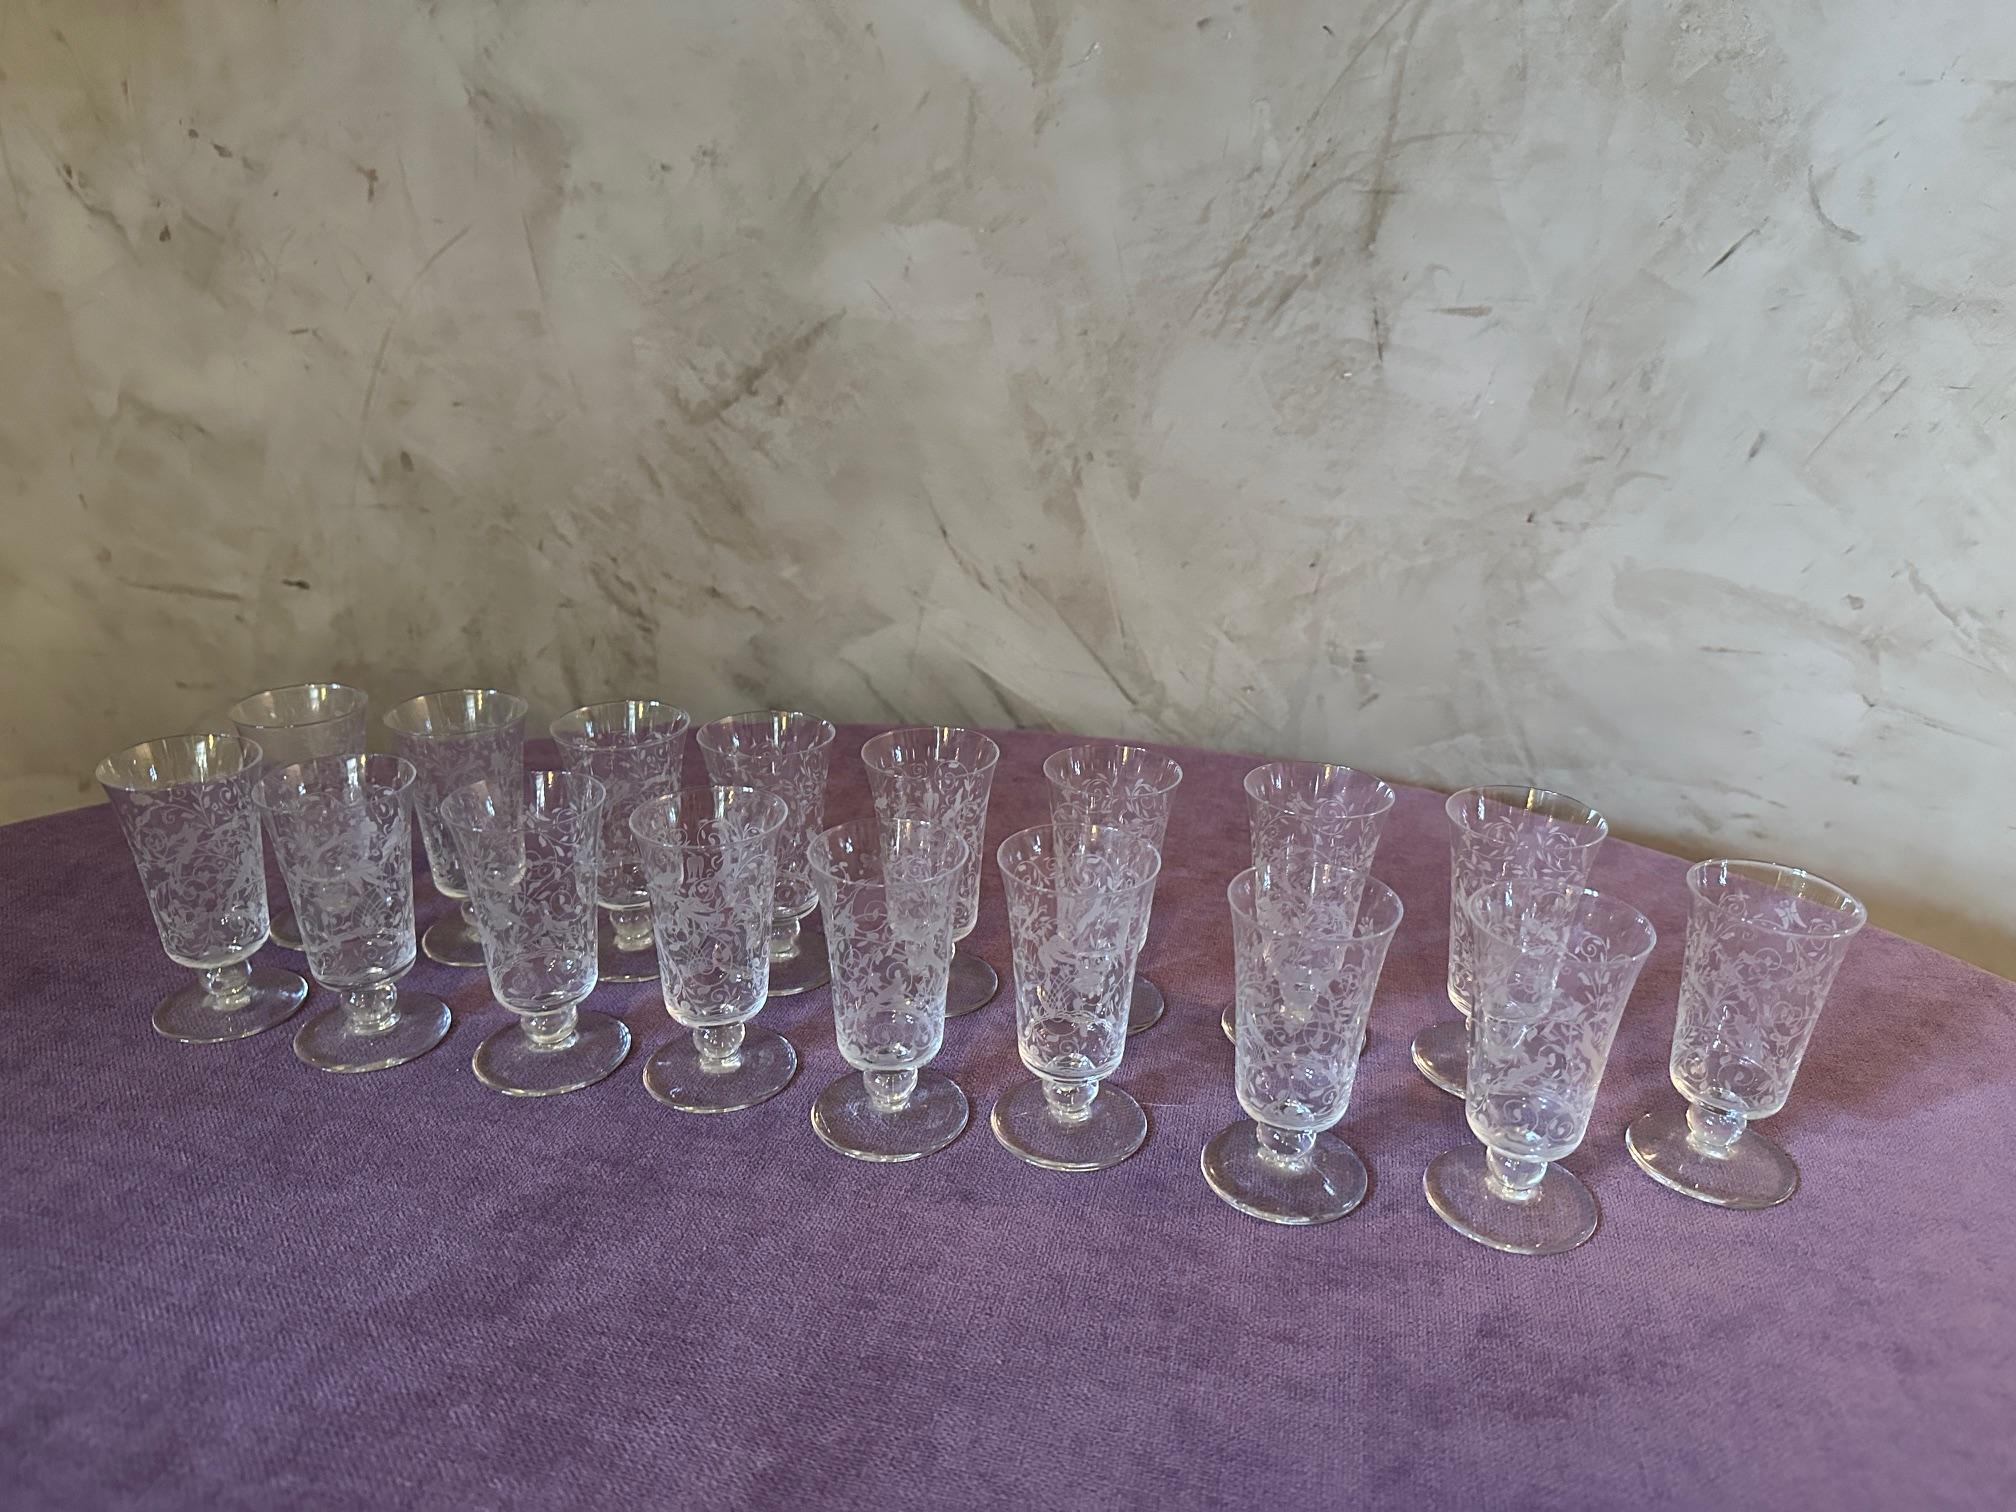 20th century French Set of Crystal Baccarat Glasses, Pitcher and Decanter For Sale 16